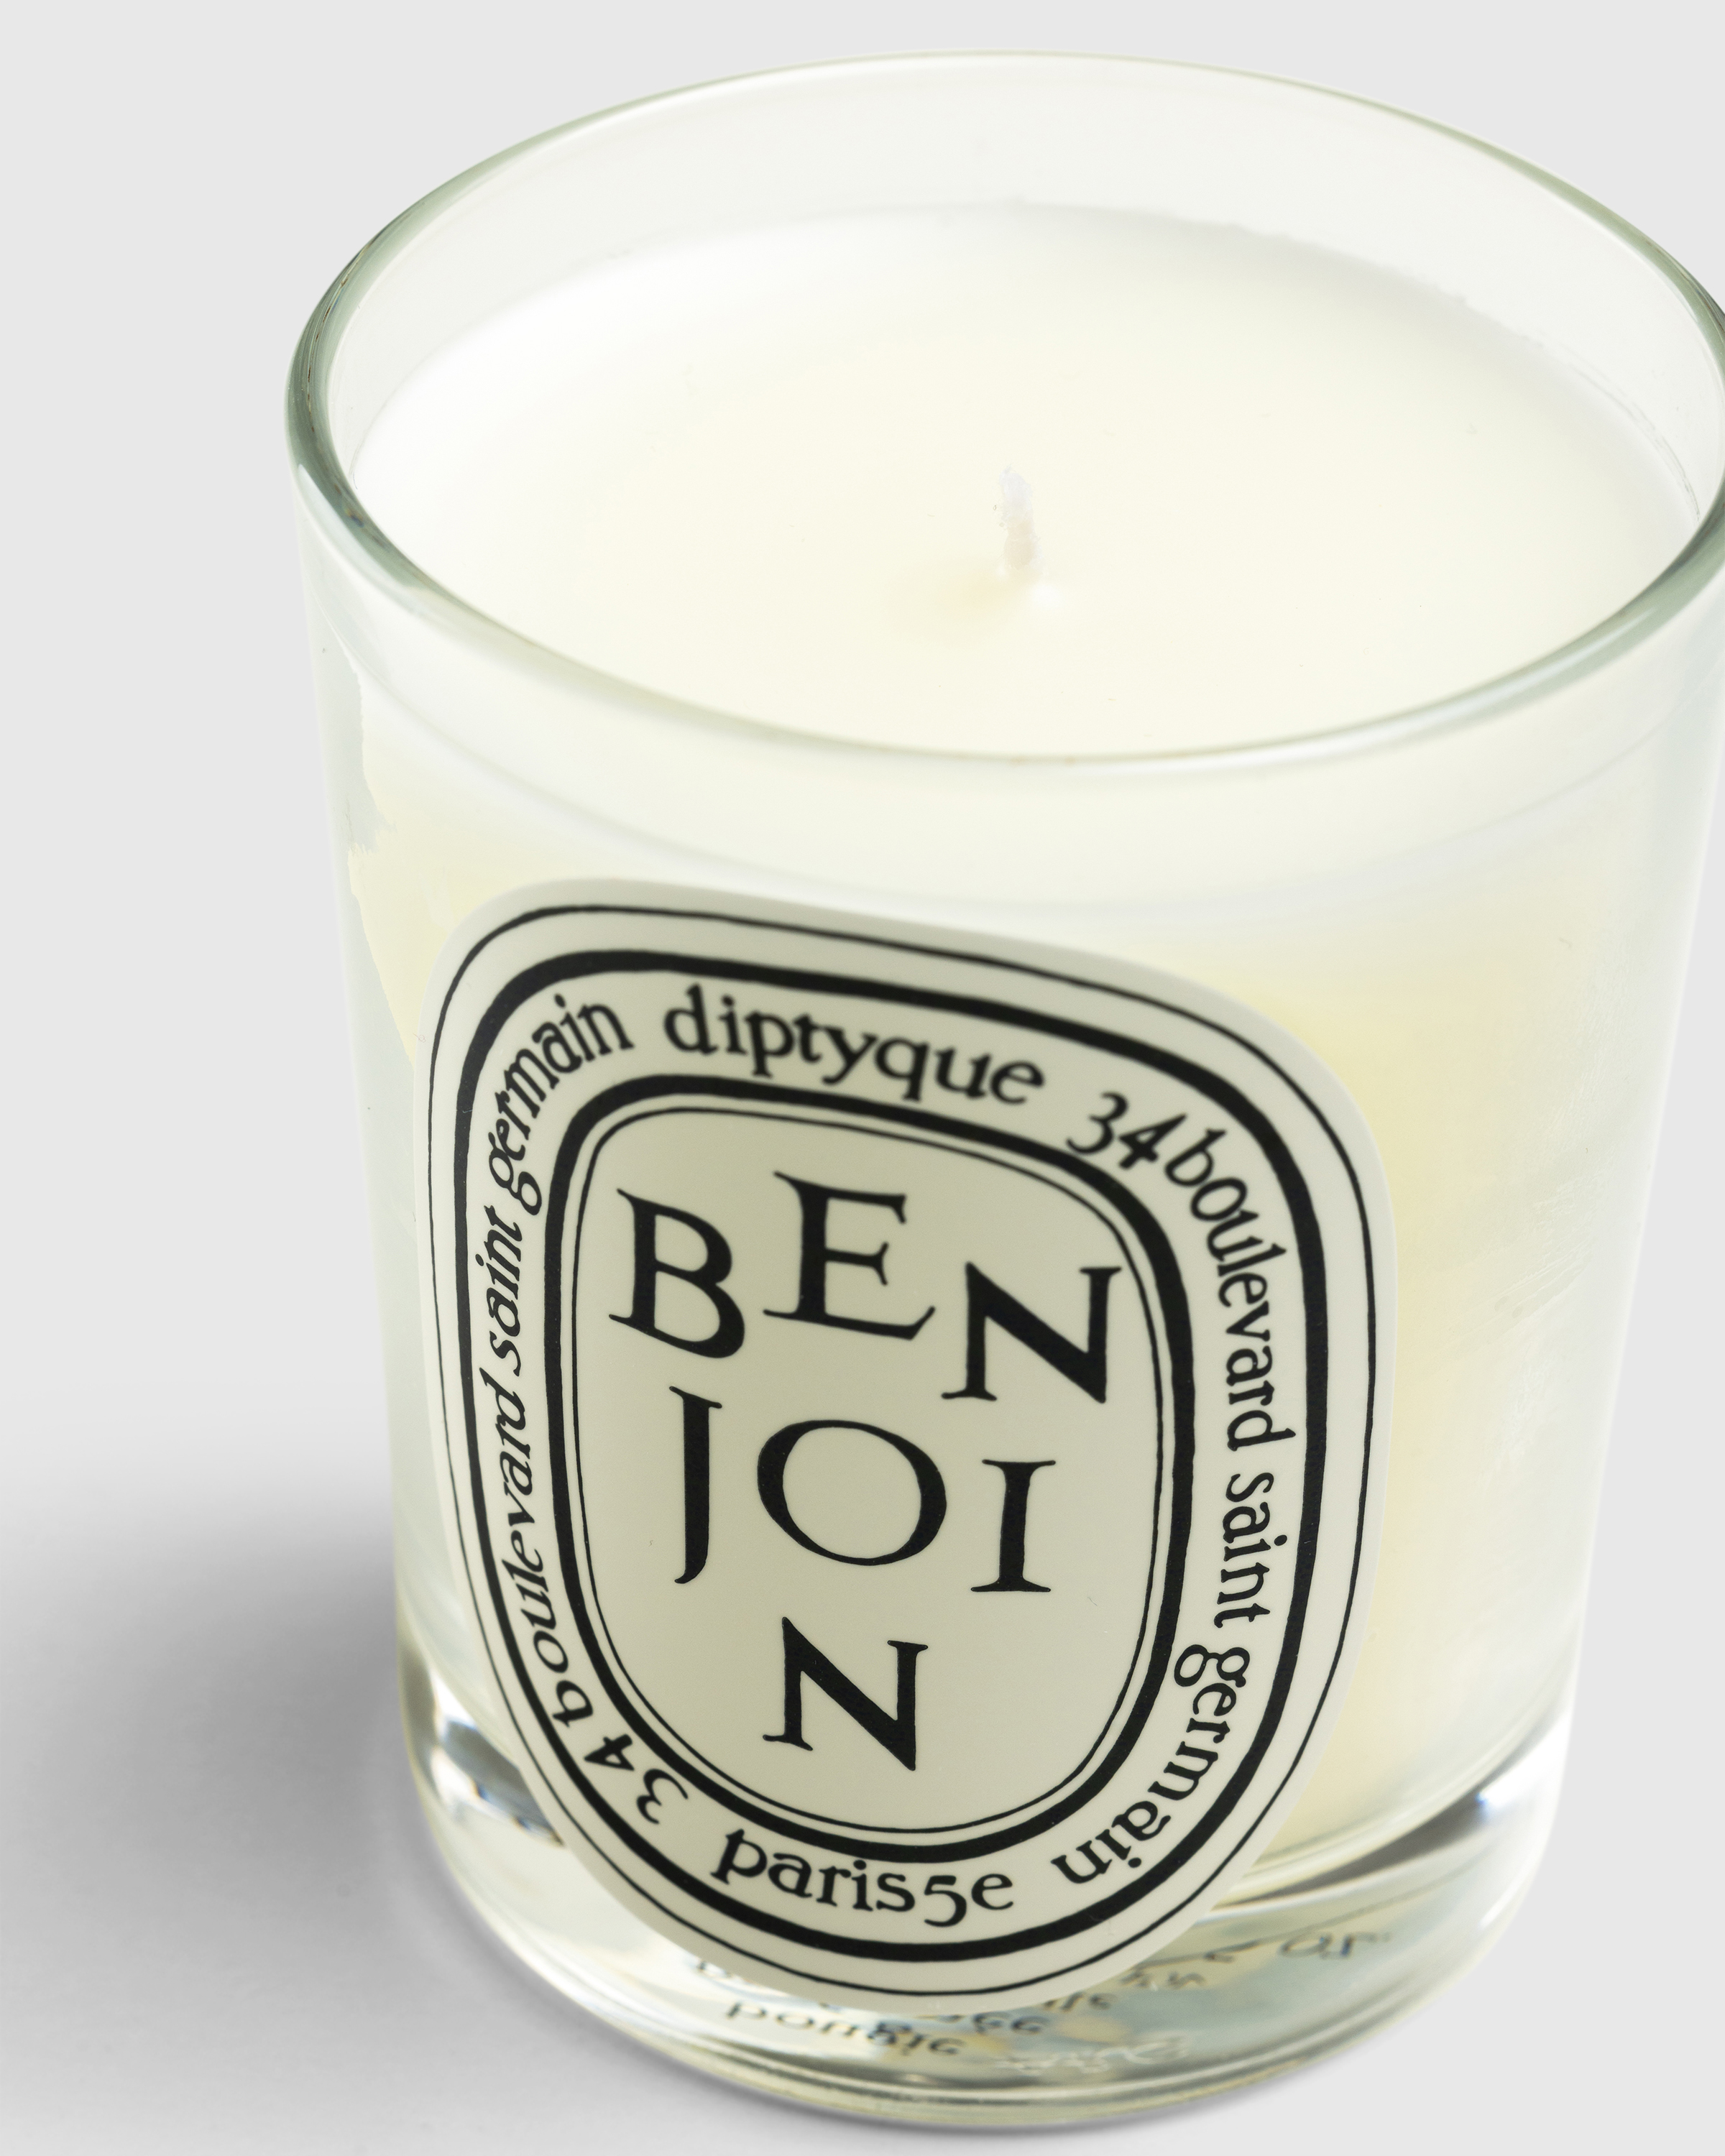 Diptyque – Standard Candle Benjoin 190g - Candles & Fragrances - White - Image 2